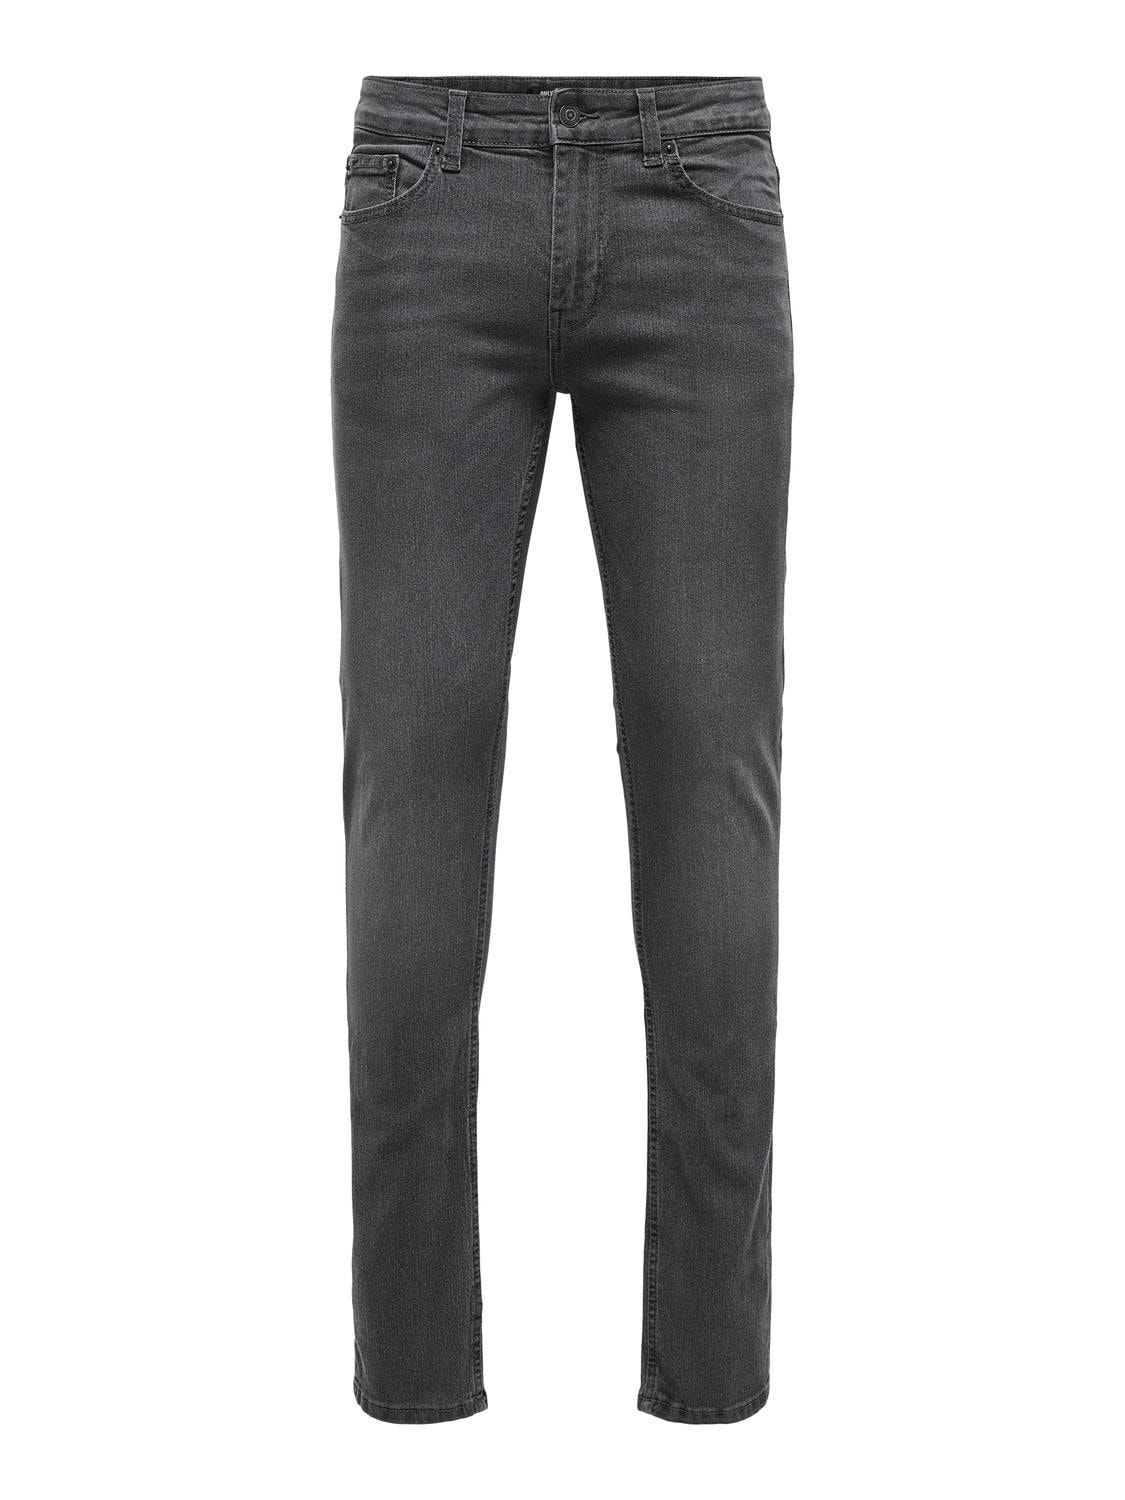 ONLY & SONS Slim Fit Mid rise Jeans -Grey Denim - 22027842